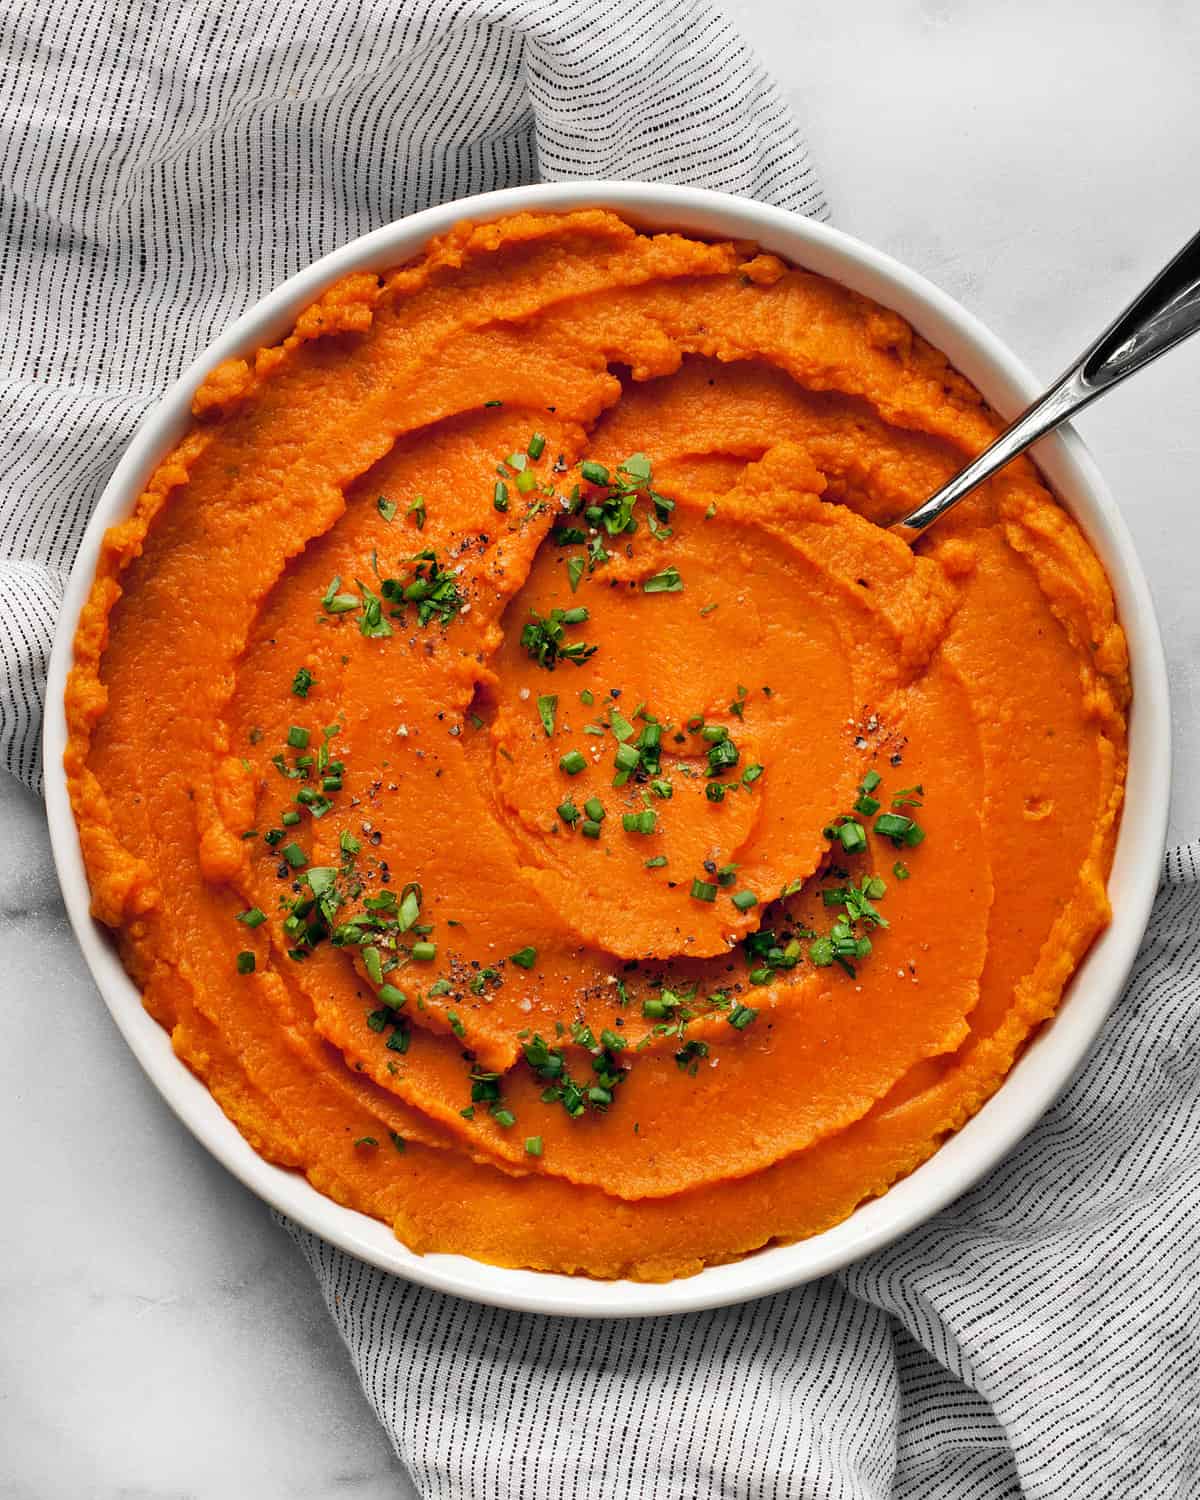 Mashed sweet potatoes in a bowl with fresh herbs.